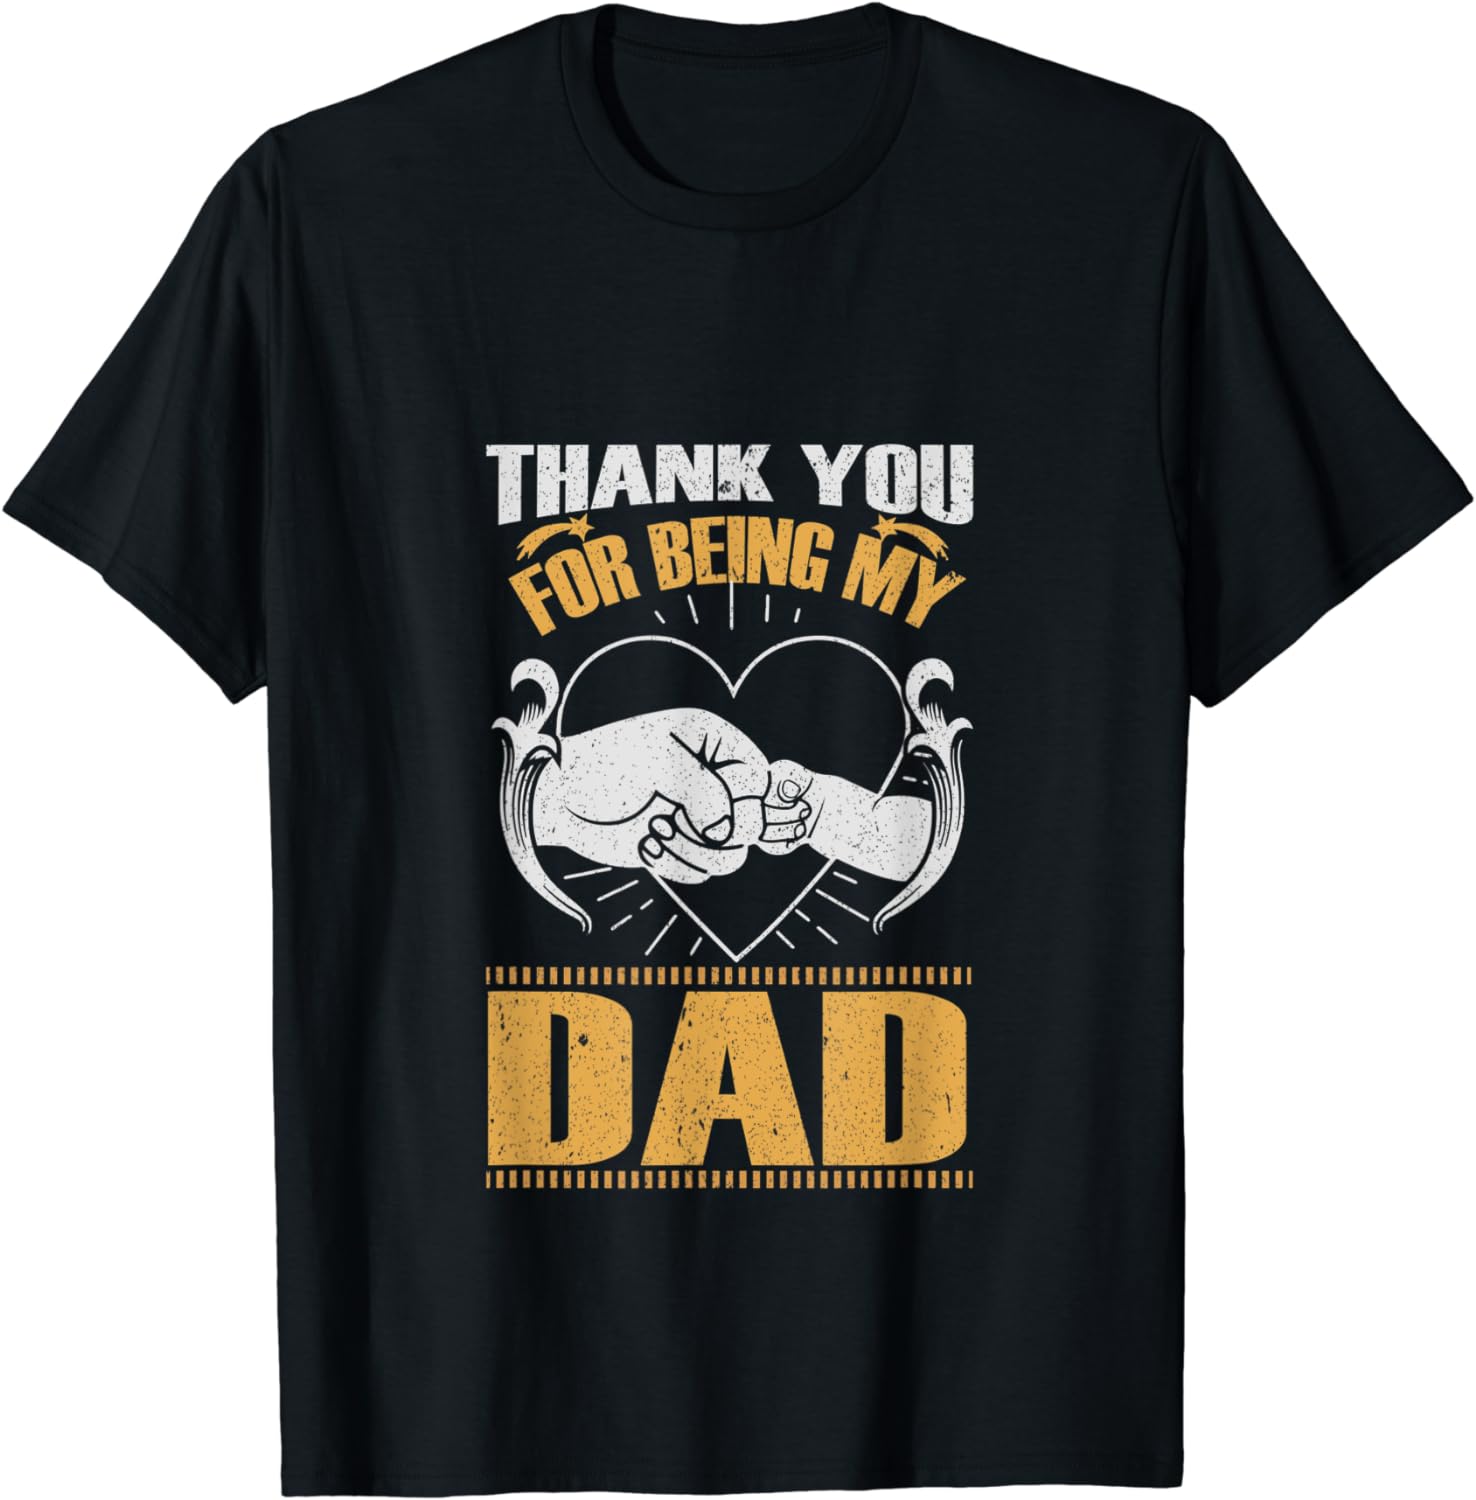 Thank You For Being My Dad T-Shirt